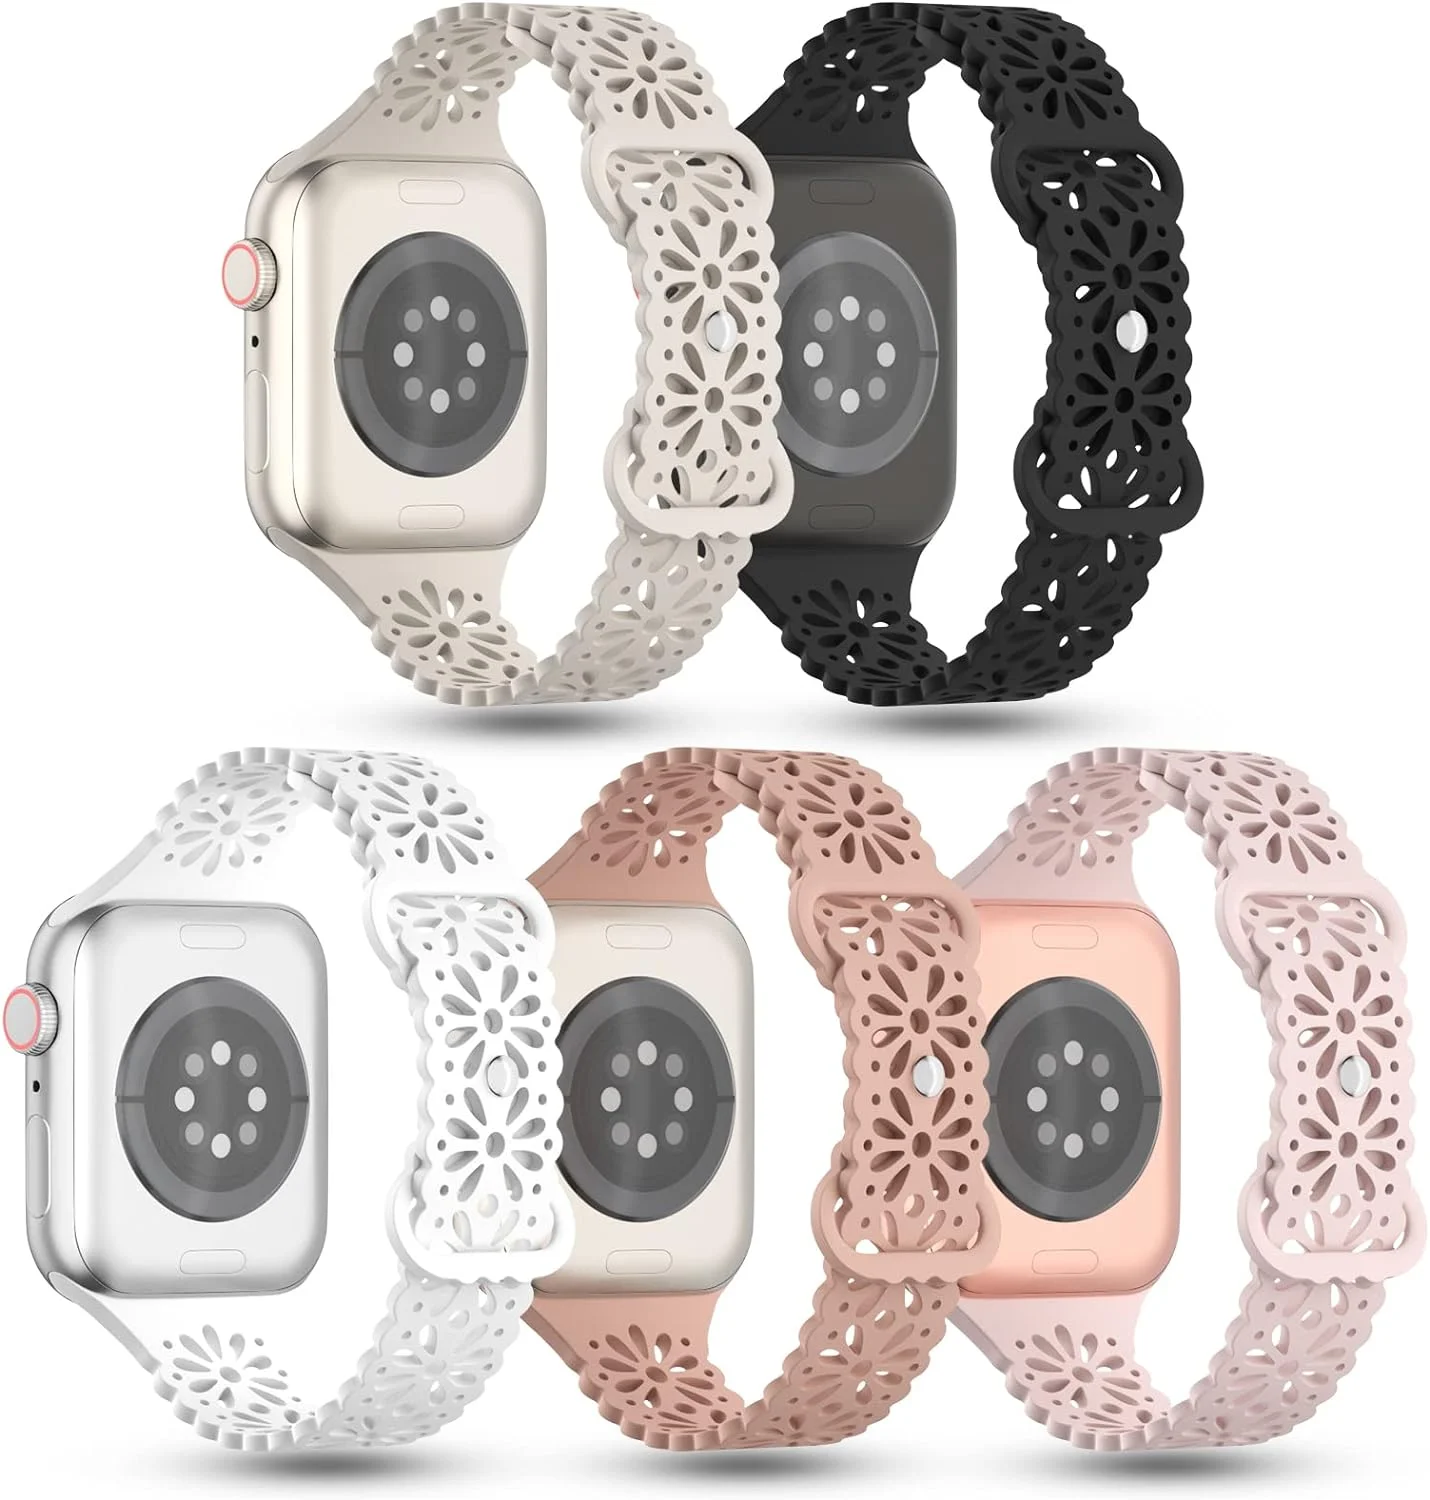 TSAAGAN 5 Pack Lace Silicone Bands Compatible with Apple Watch Band